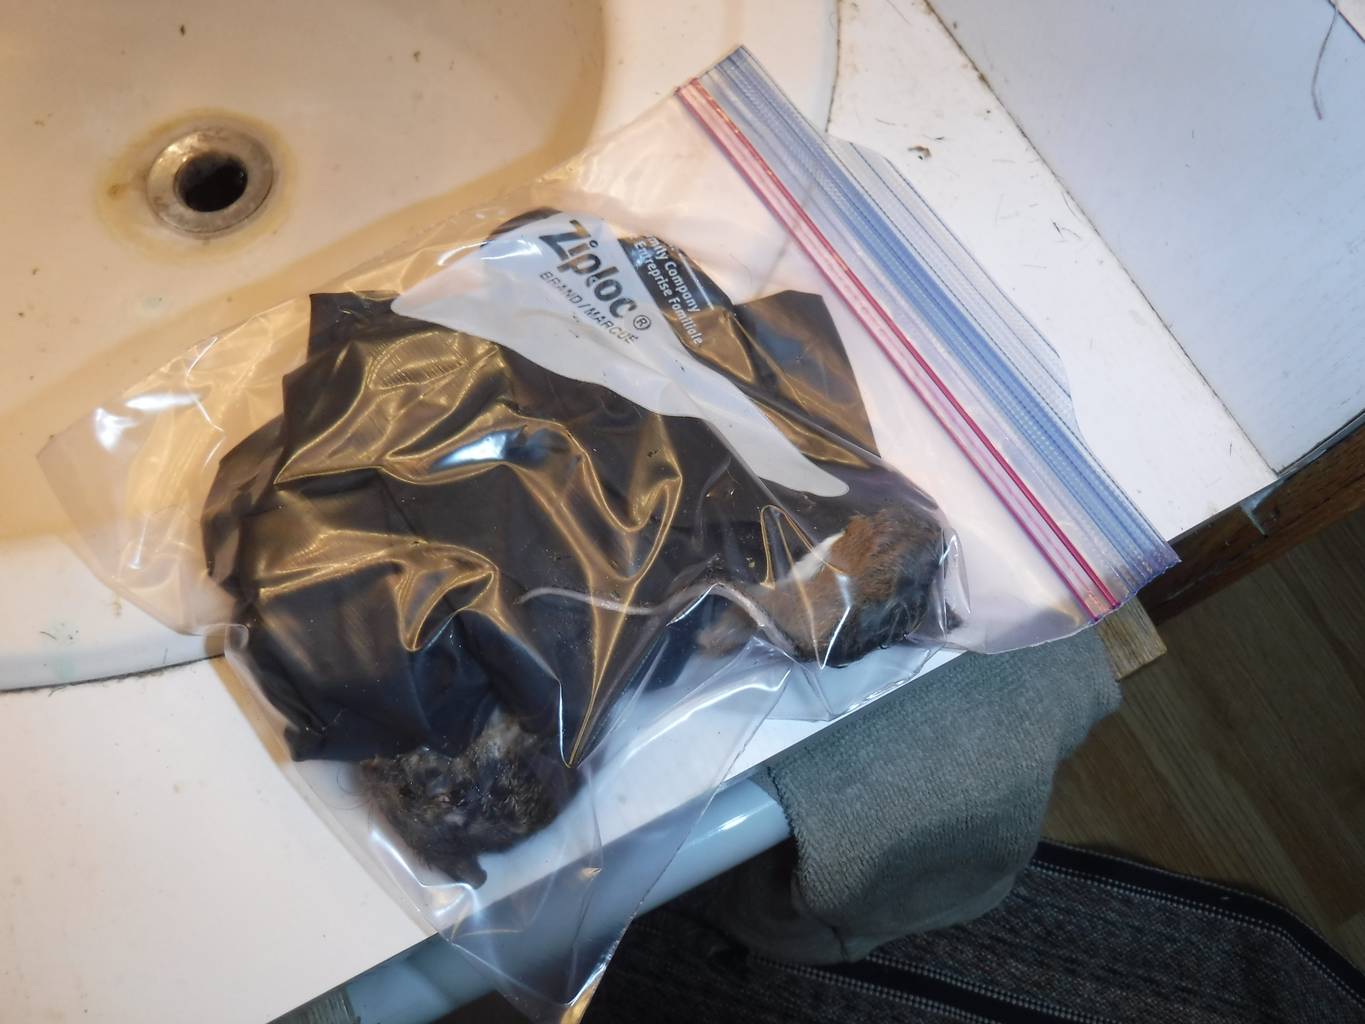 Mice and gloves, safely put away in a Ziploc bag, to go into the garbage bag..